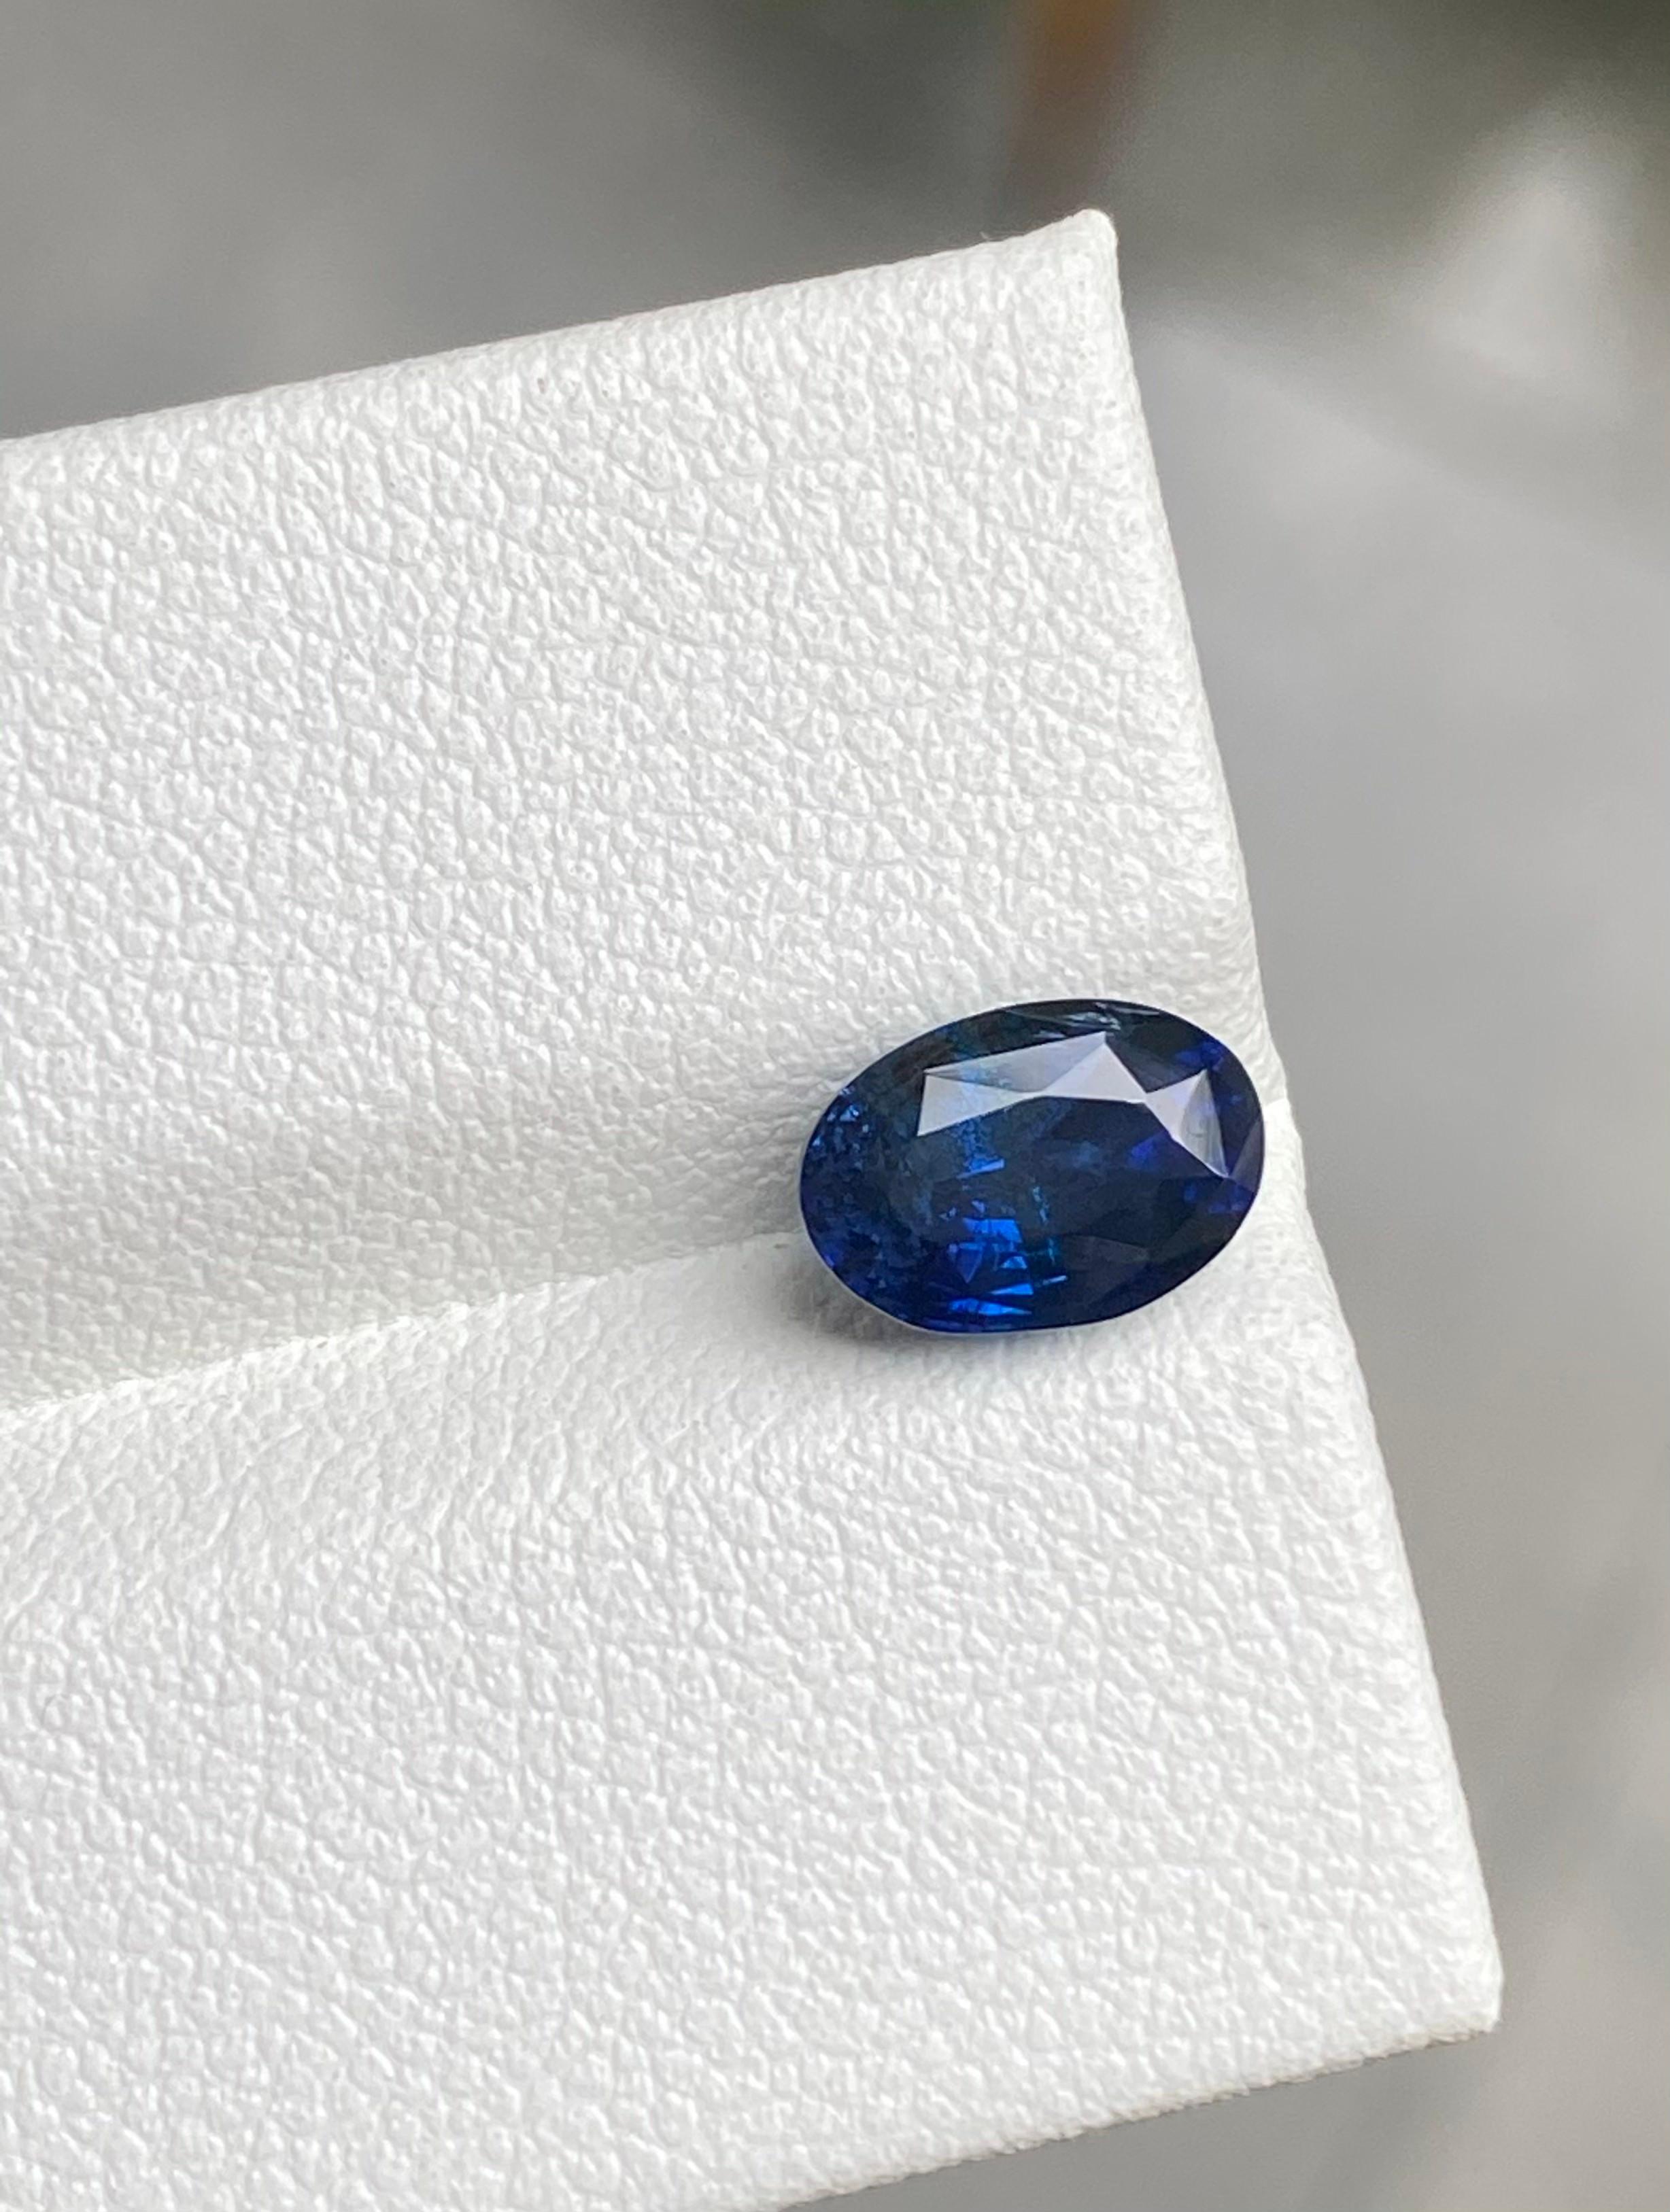 7mm sapphire in carats